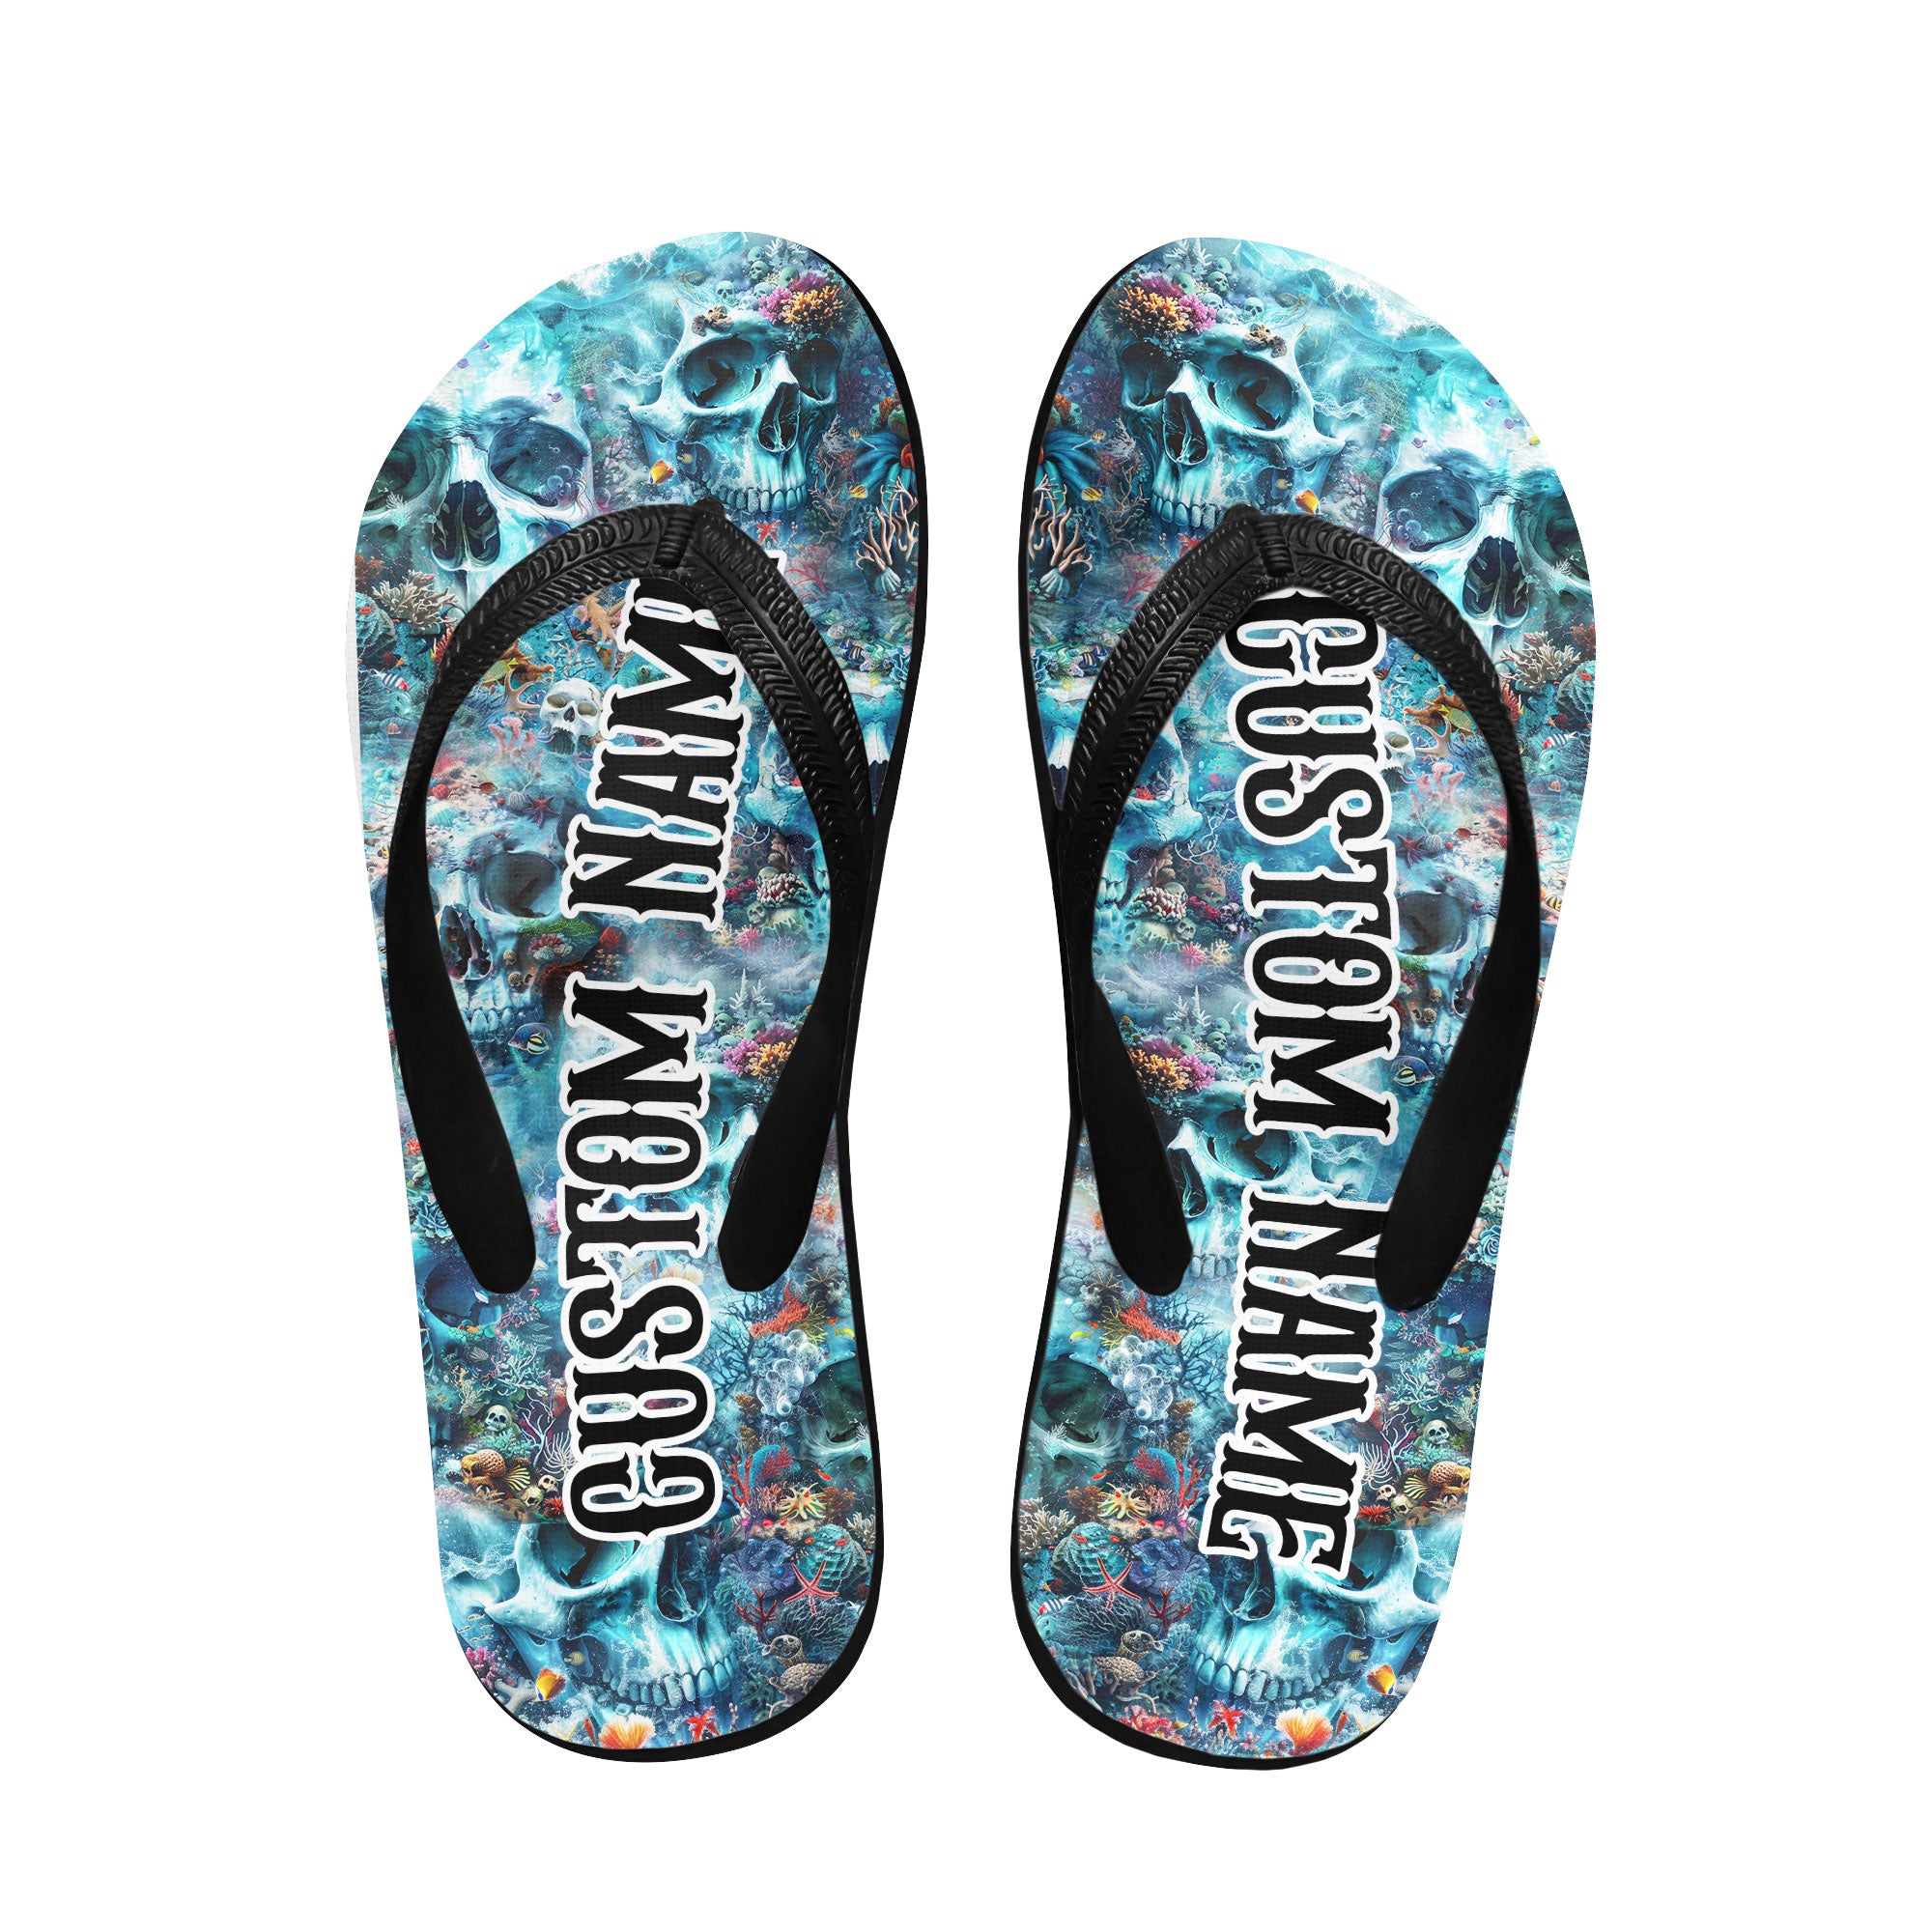 Image of a pair of beach flip flops with a sleek design, featuring a comfortable yoga mat footbed, non-slip sole, and water-friendly materials. Perfect for summer outings, beach walks, and casual occasions.